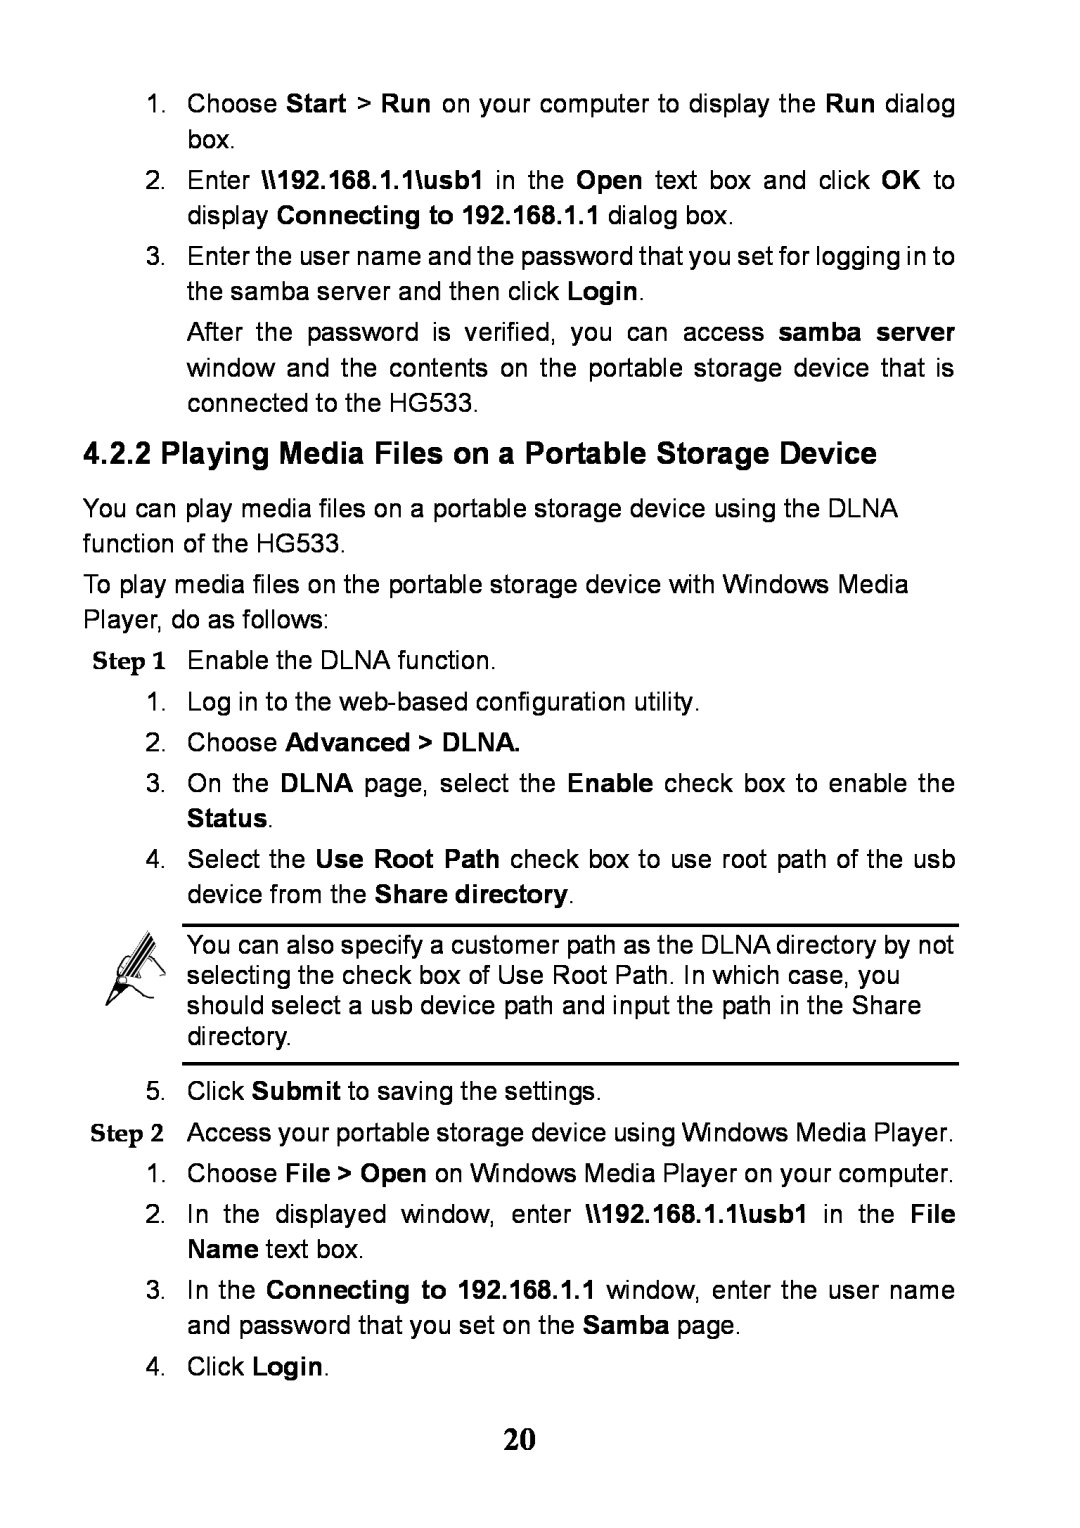 Huawei V100R001 manual Playing Media Files on a Portable Storage Device, Choose Advanced DLNA 